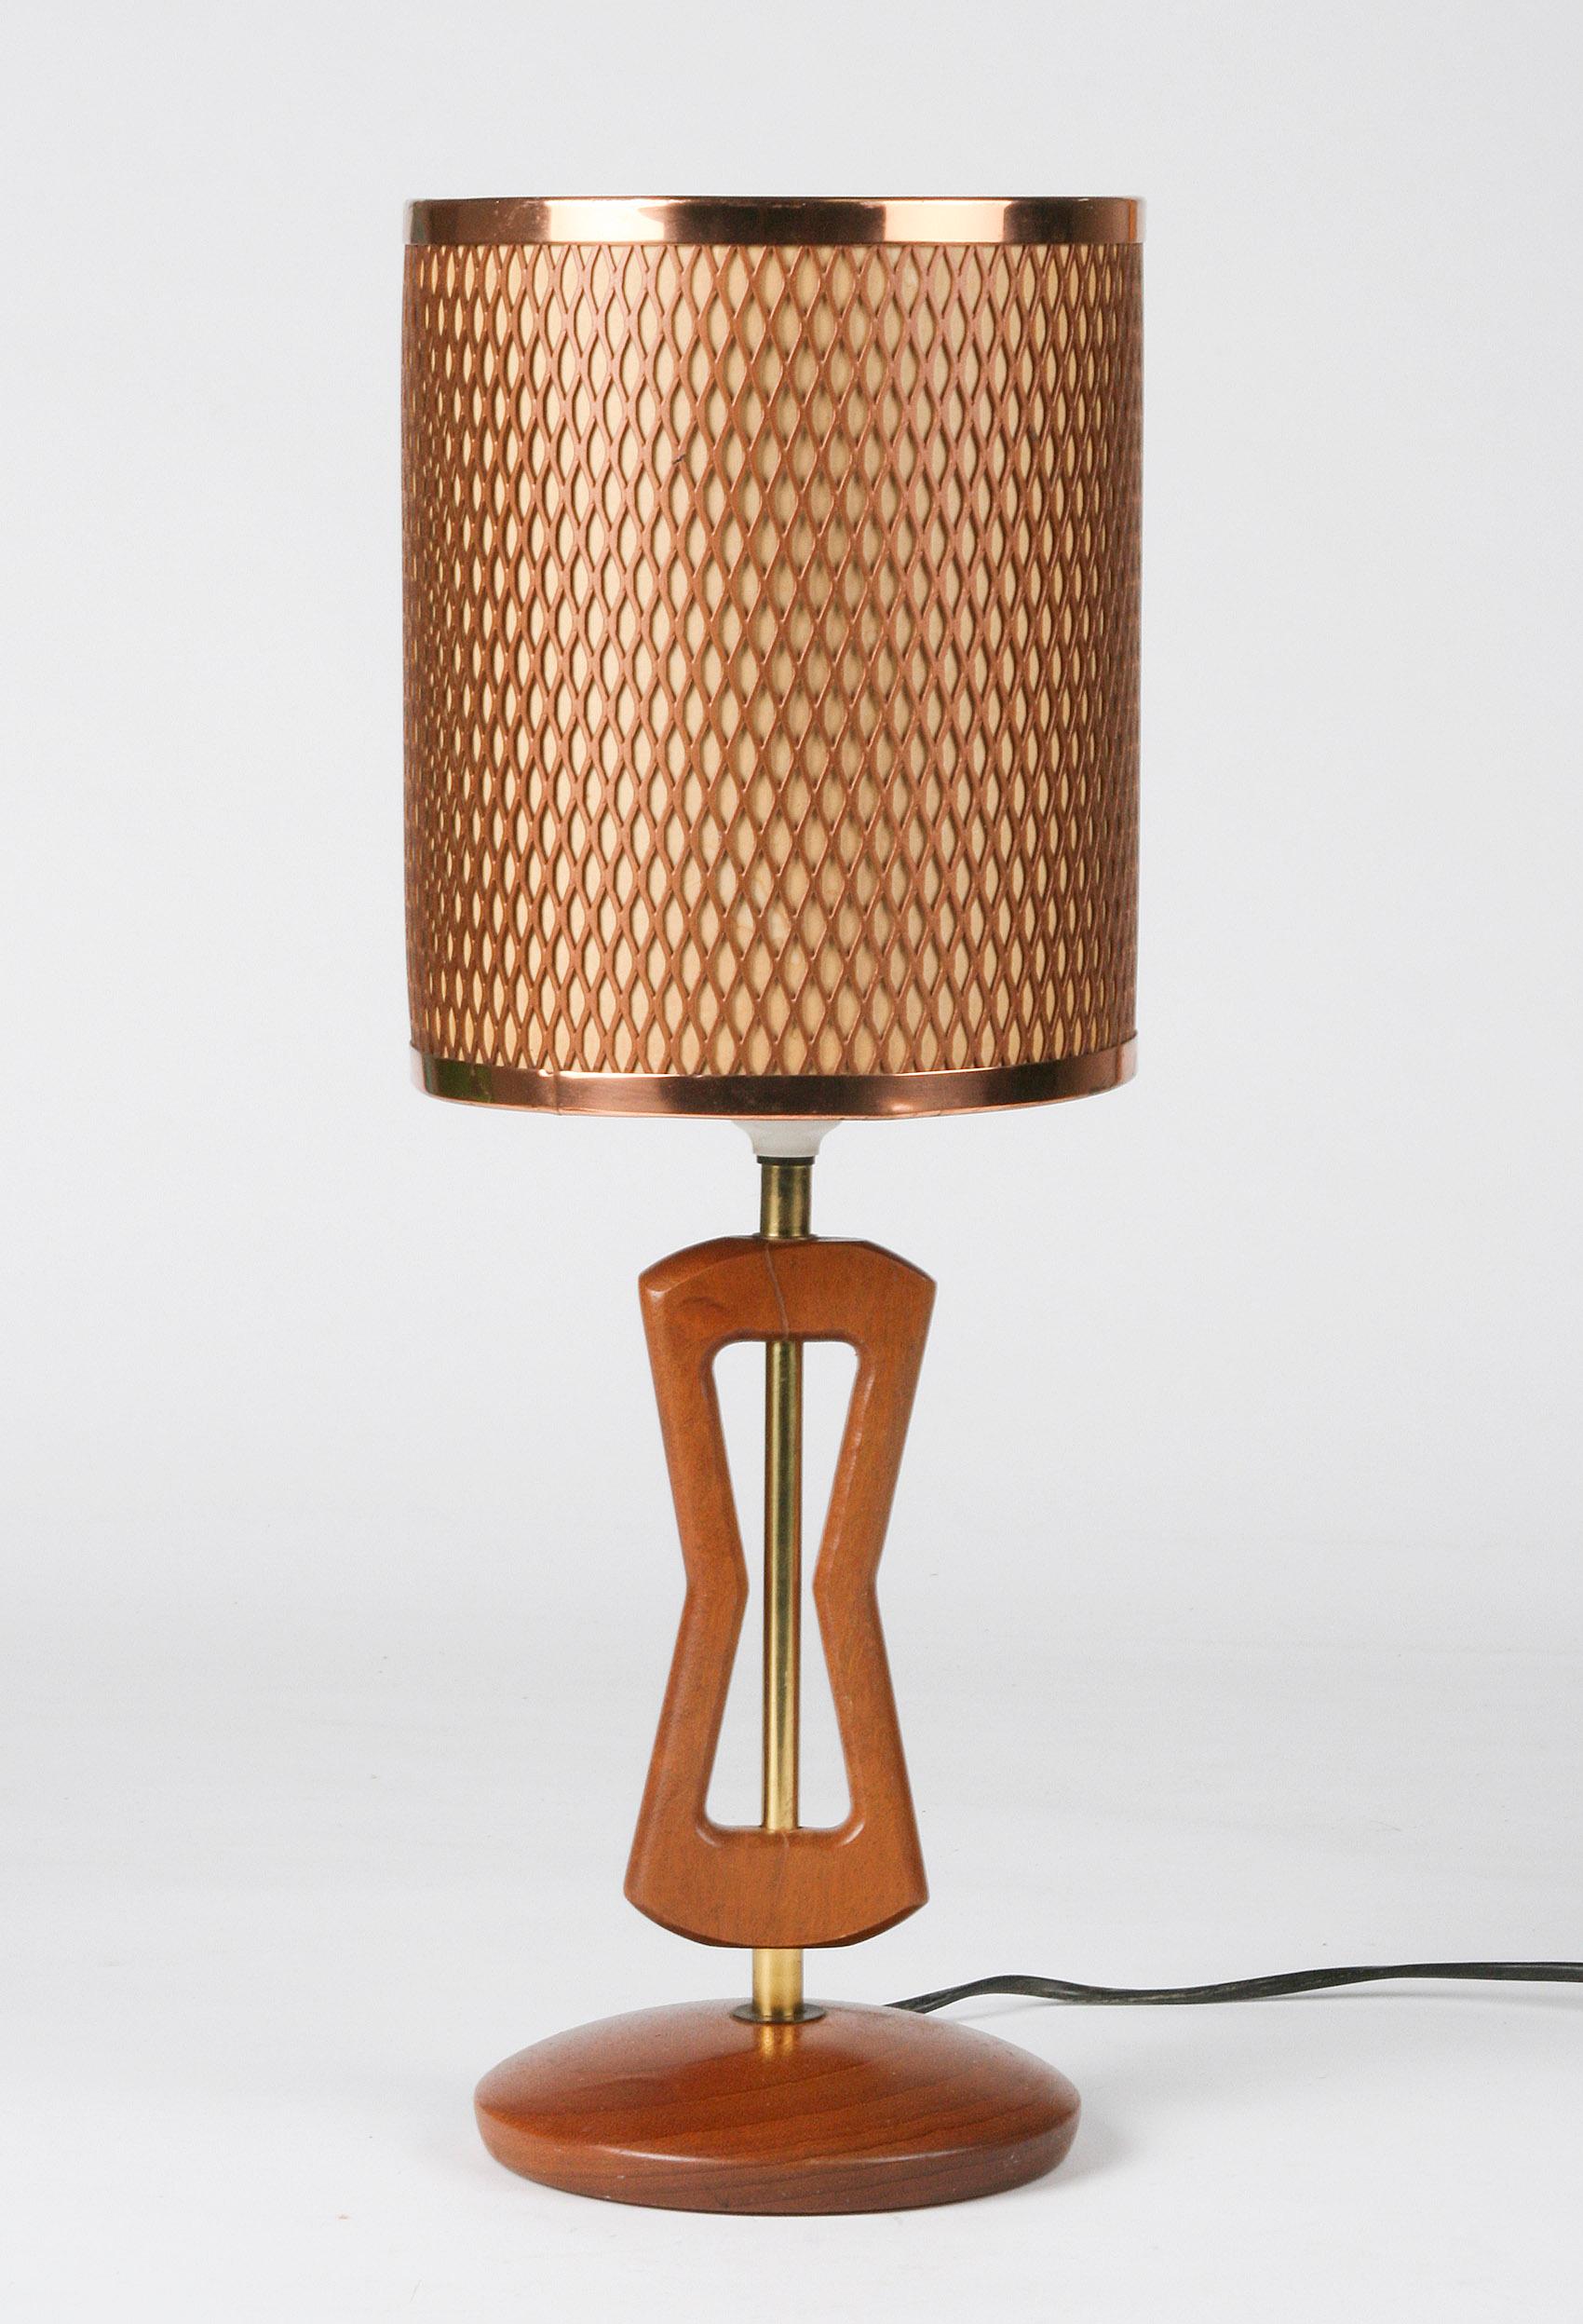 Nice table lamp made of beechwood with a copper openwork lampshade.
It is typical Scandinavian design.
Maker is unknown.